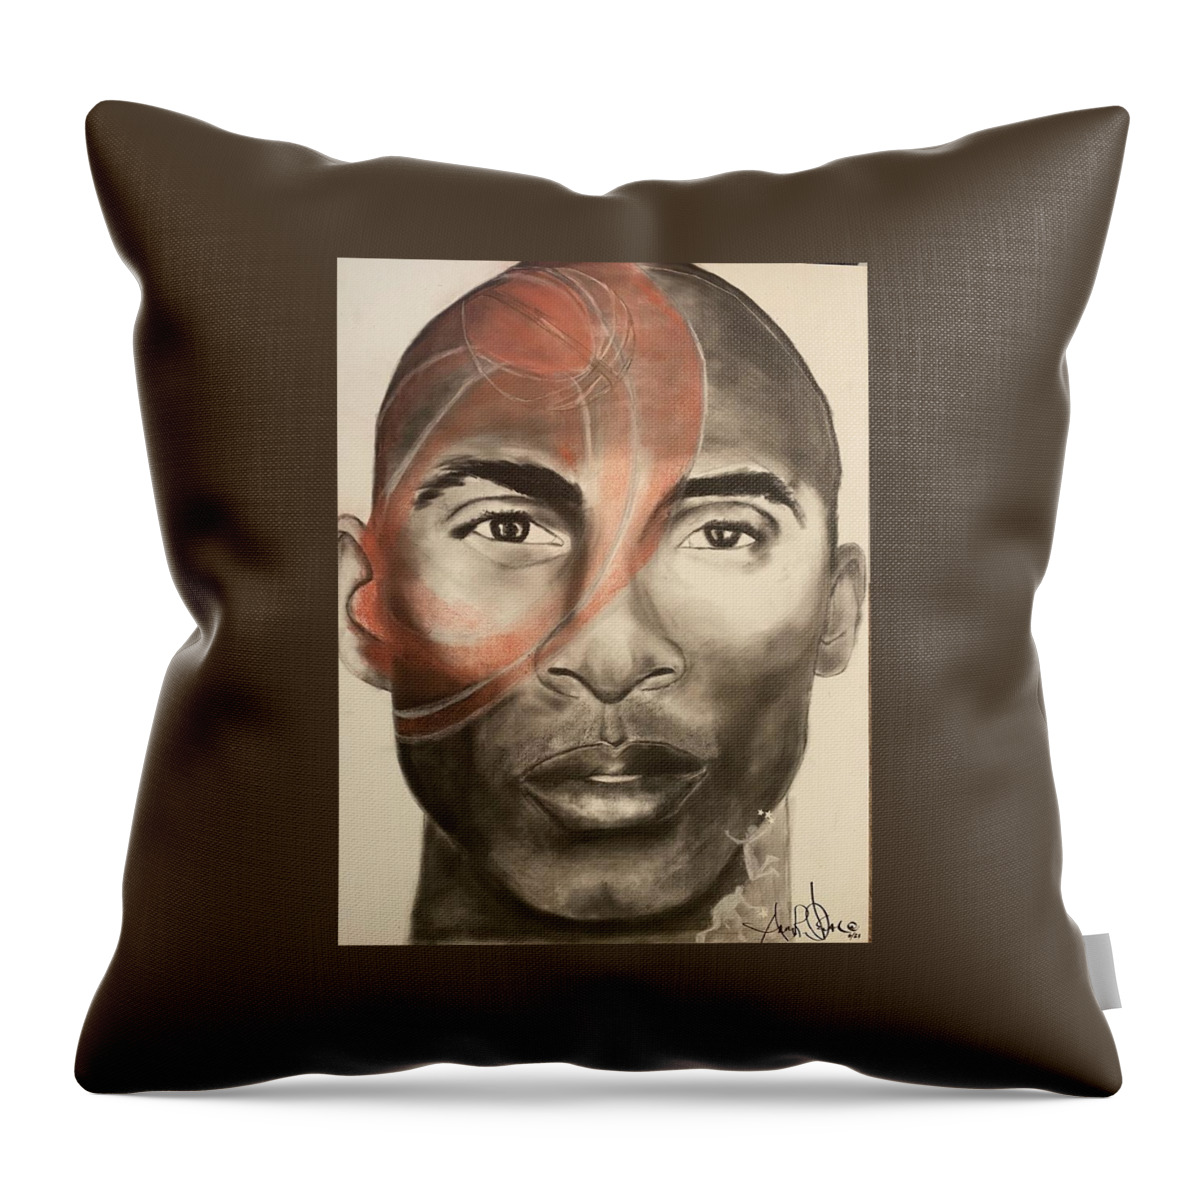  Throw Pillow featuring the drawing KB by Angie ONeal